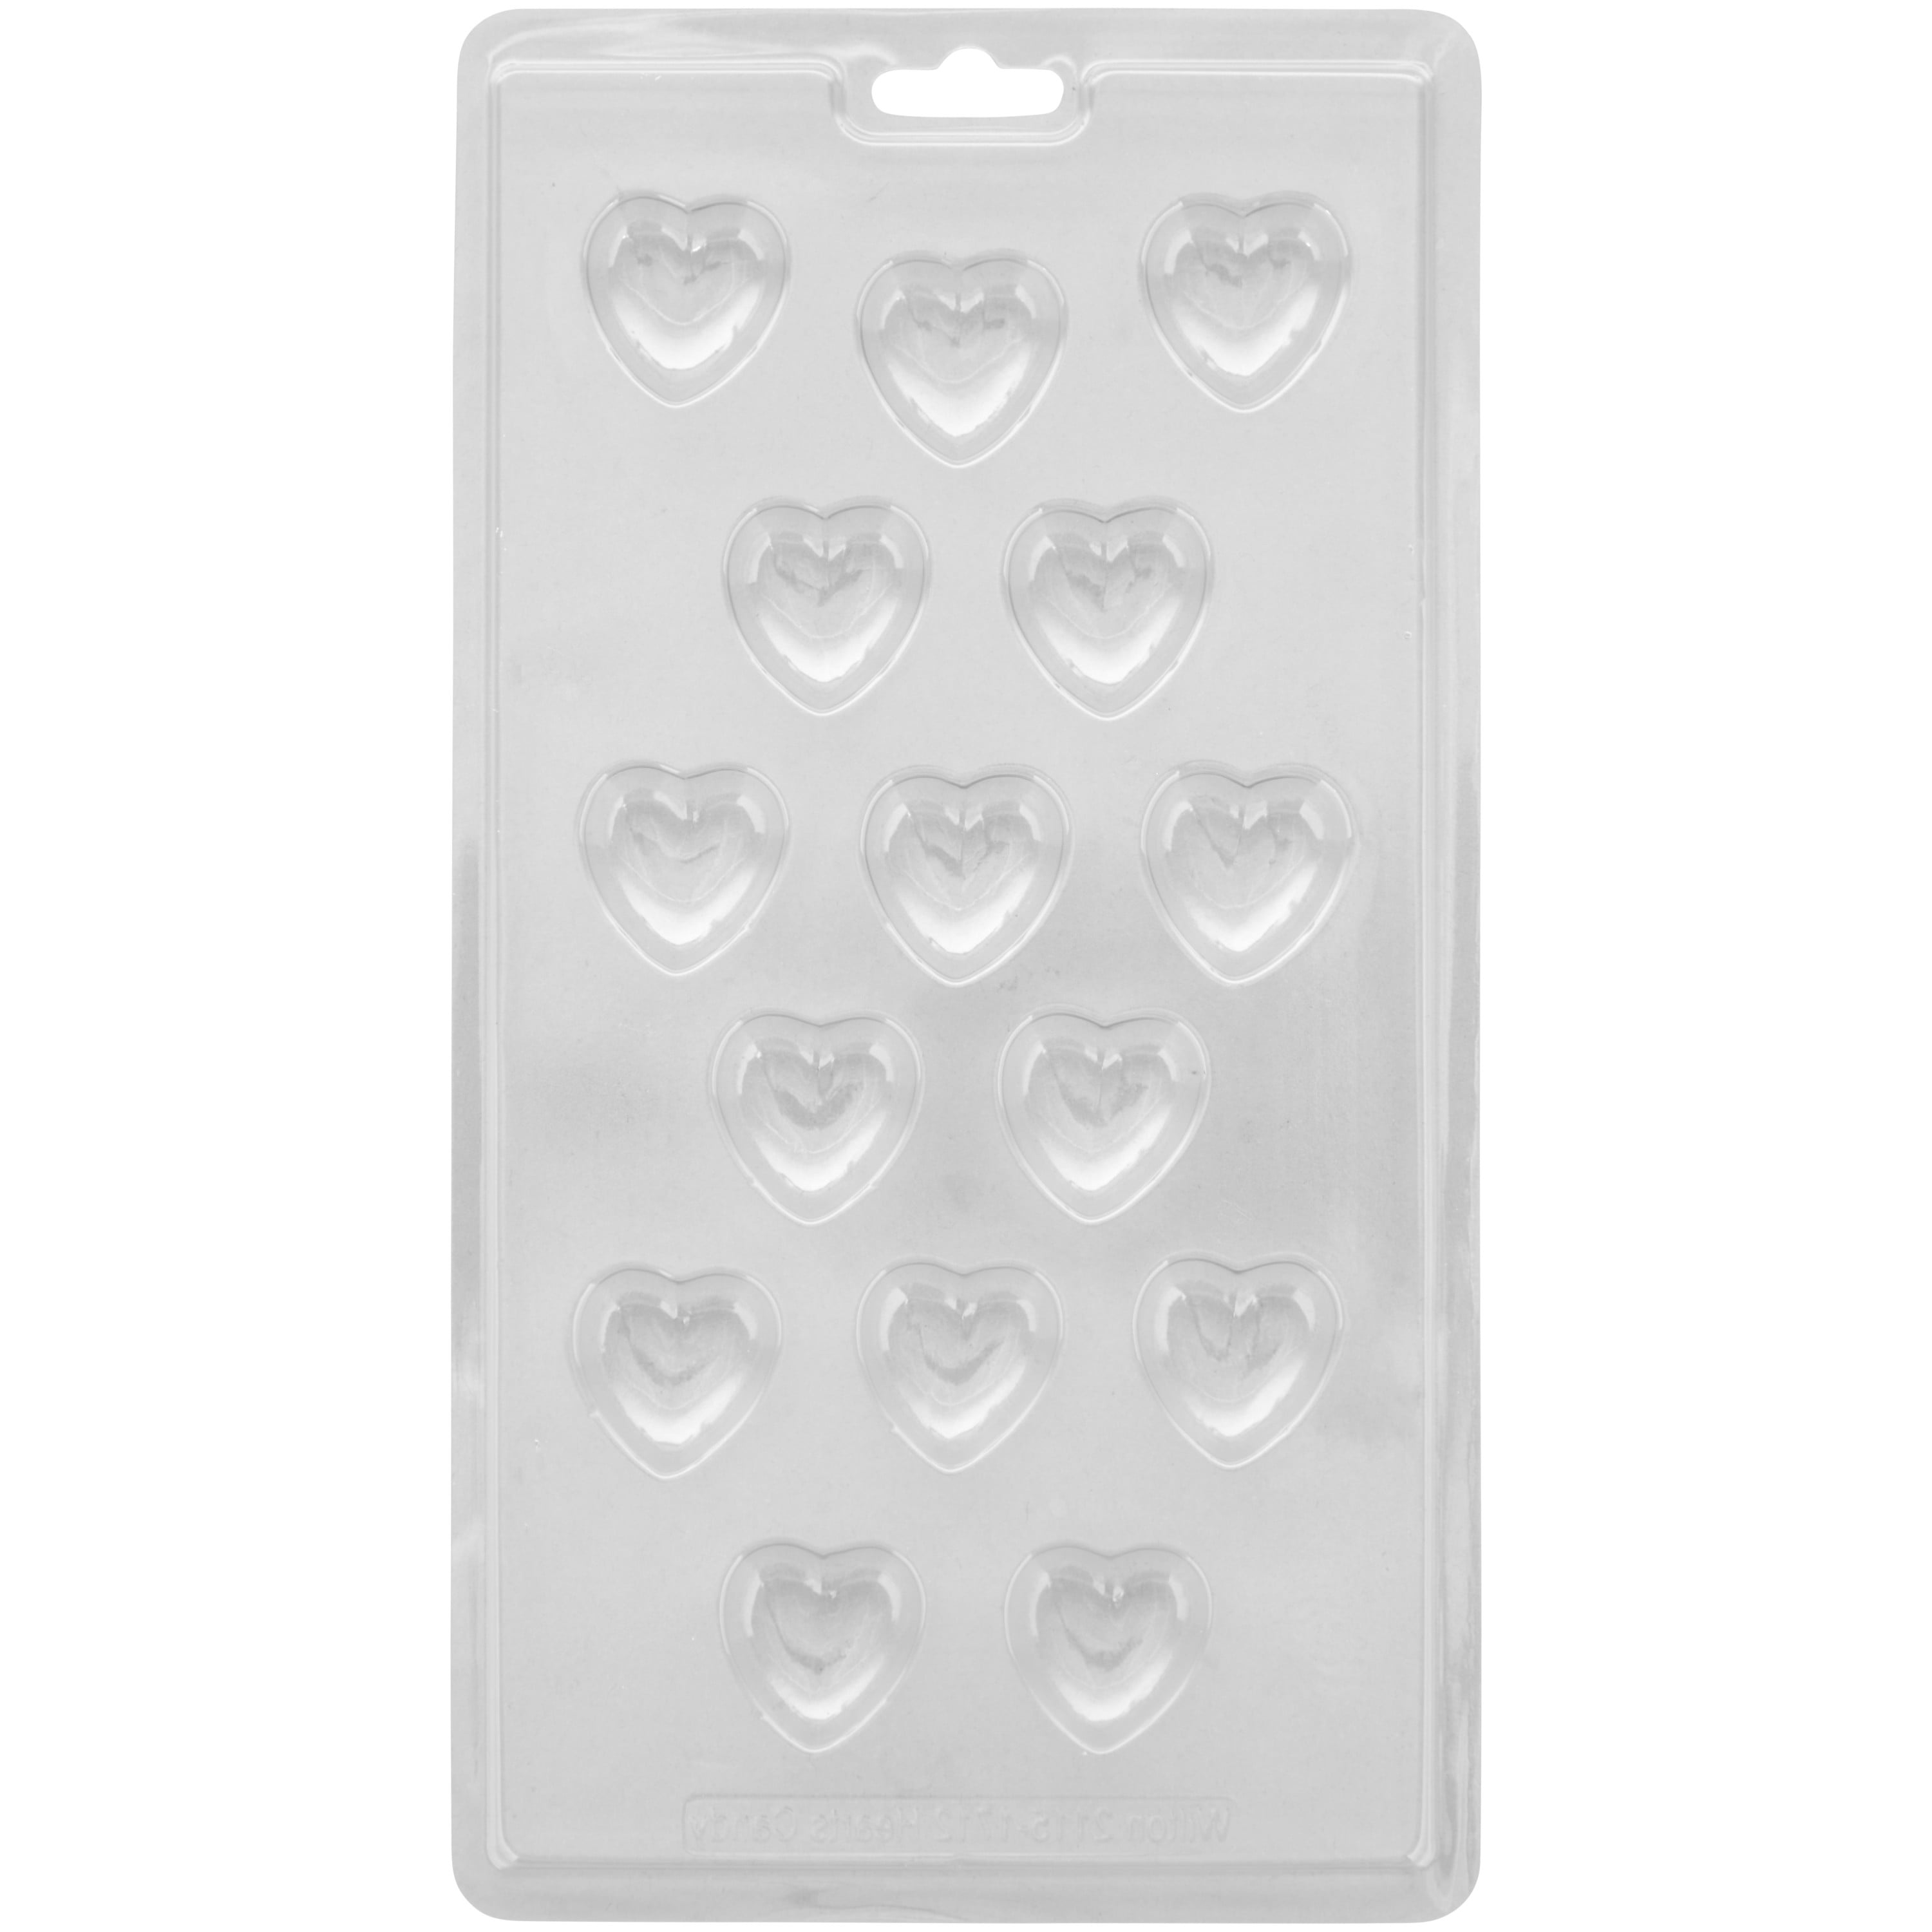 homEdge 15-Cavity Dimpled Heart Shape Chocolate Mold, Silicone Dimpled  Valentine Heart Chocolate Gummy and Candy Mold